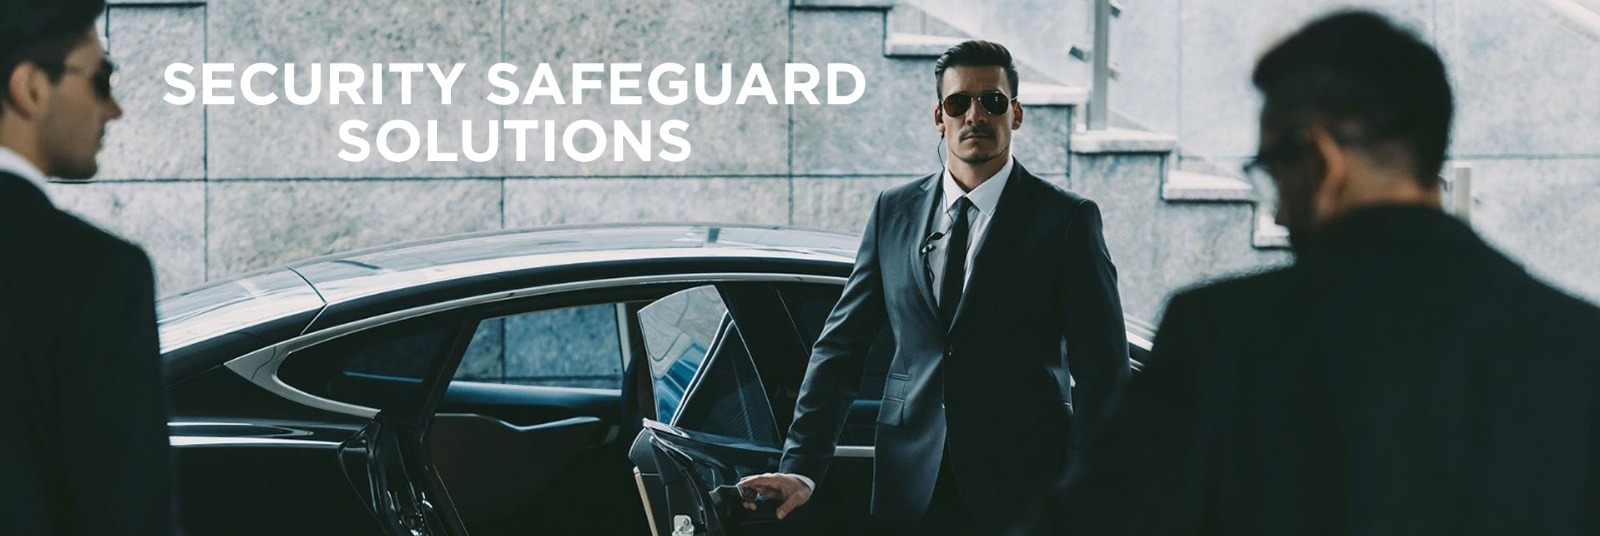 security safeguard solutions